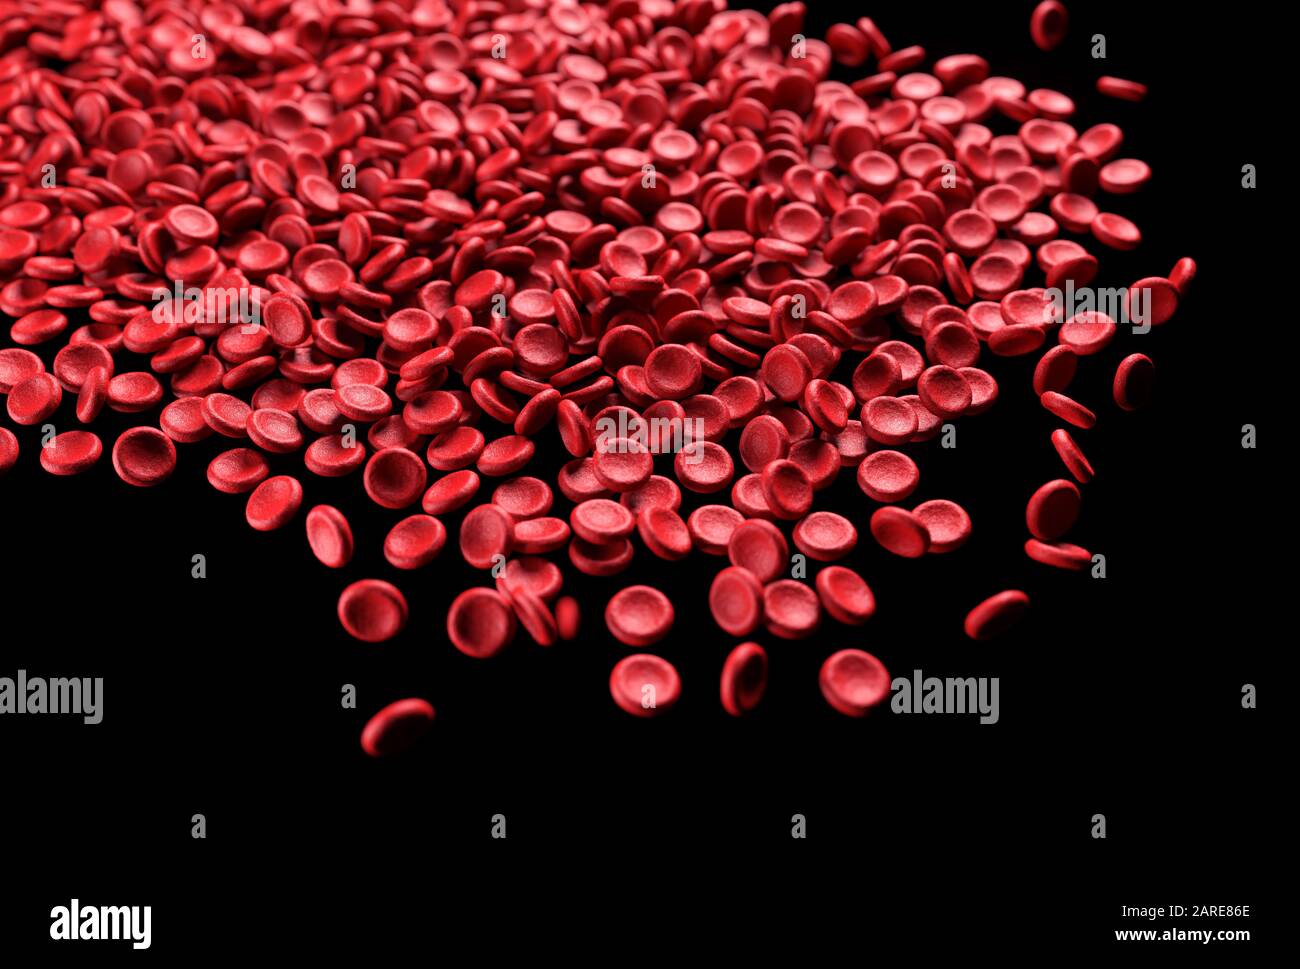 Red blood cells spilling out on black background. 3D illustration, conceptual image. Stock Photo